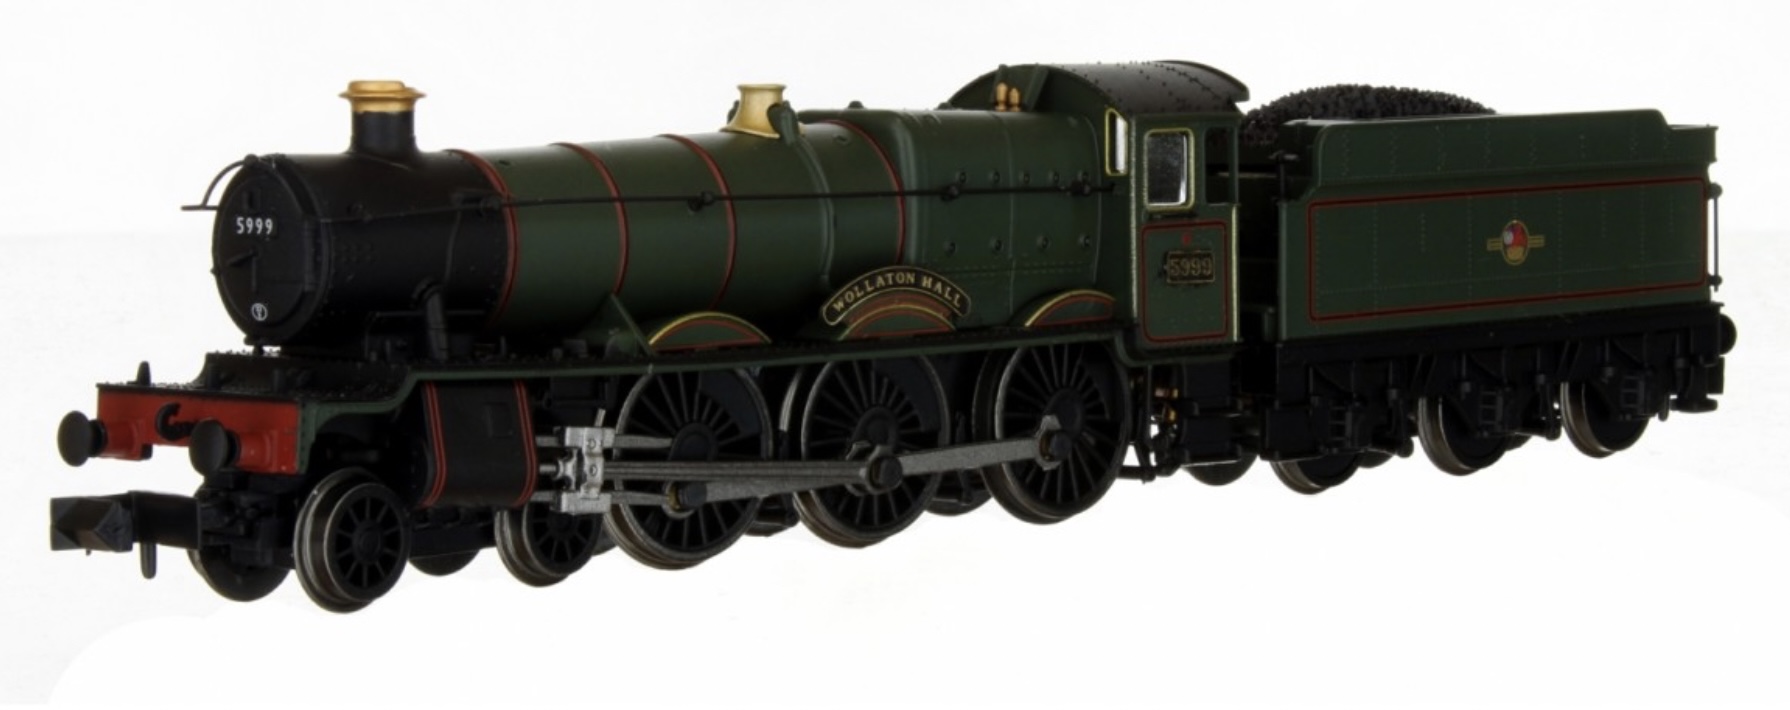 N Scale - Dapol - 2S-010-006D - Locomotive, Steam, 4-6-0 , 4900 Class Hall - Great Western - 5999